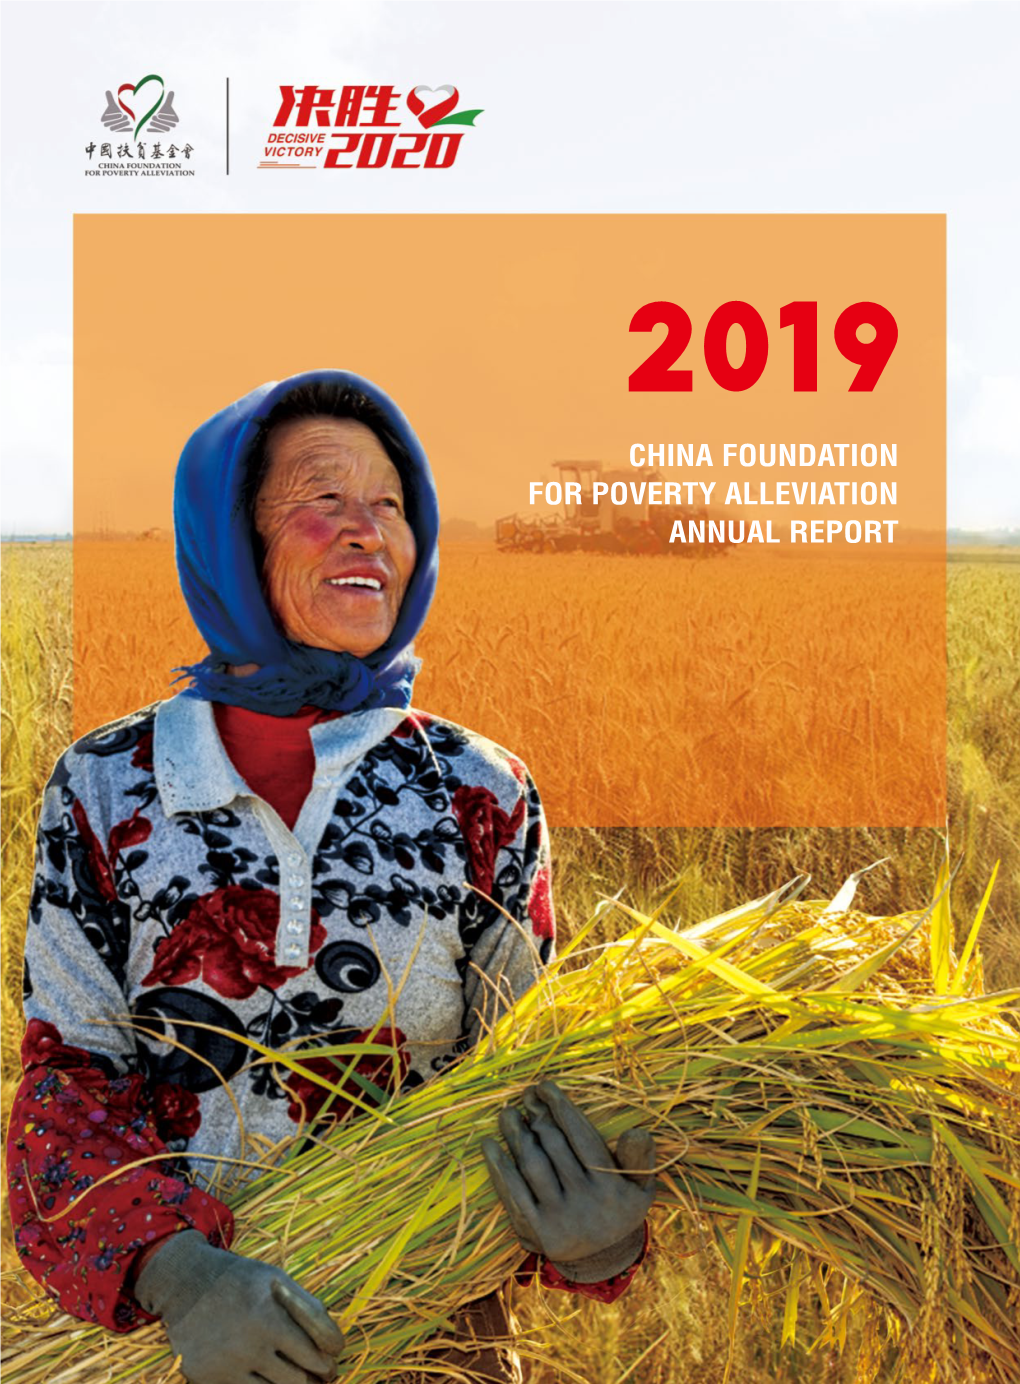 China Foundation for Poverty Alleviation Annual Report